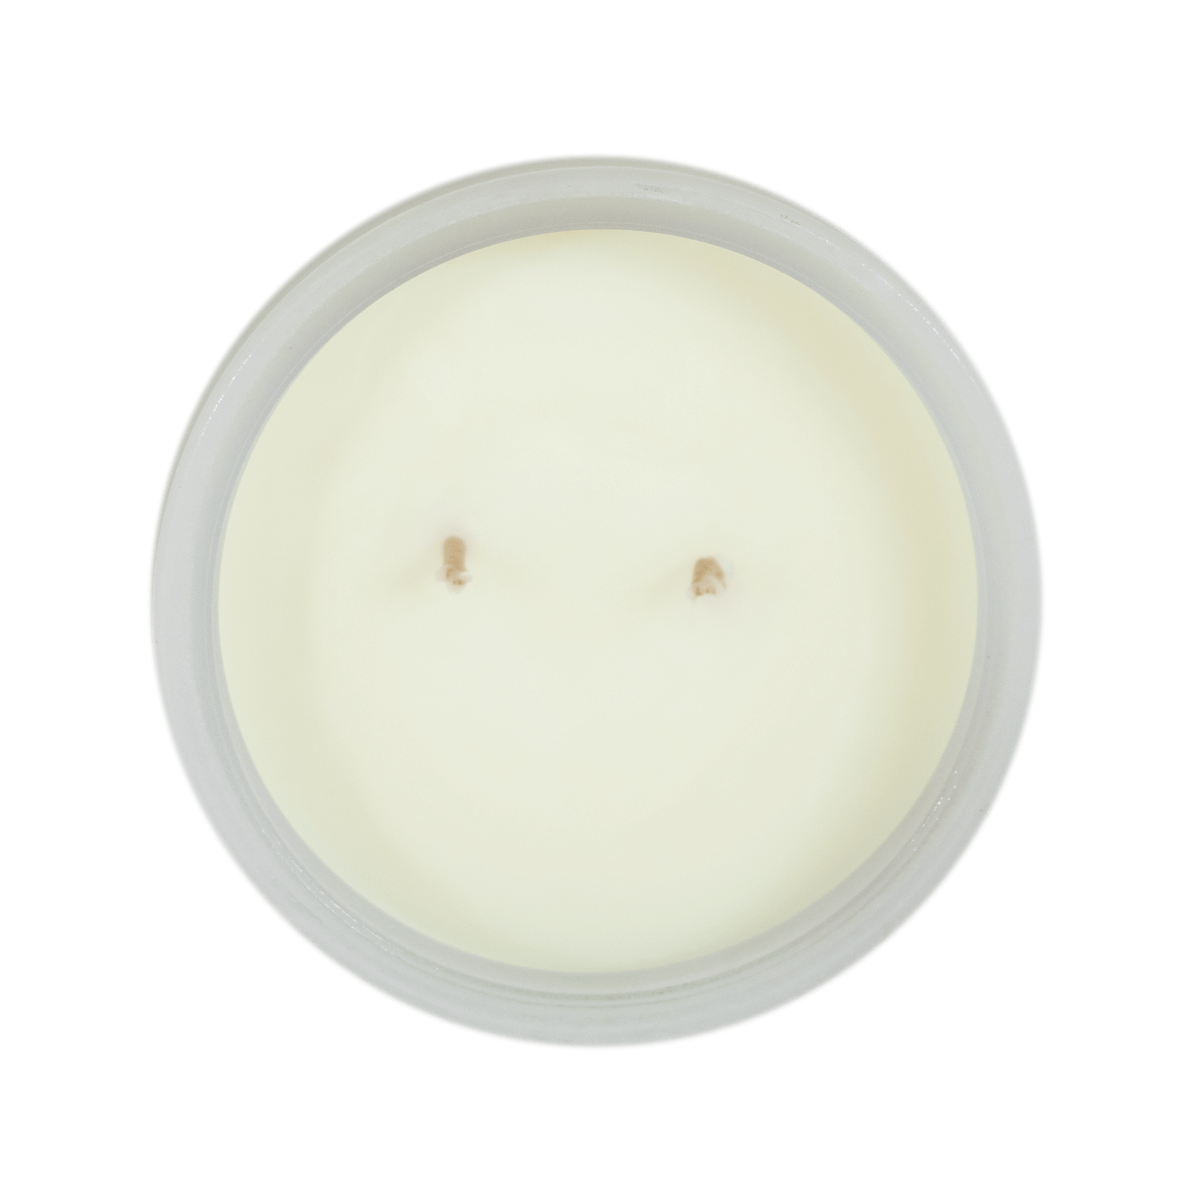 Two Wick Candle - Frosted White Glass Jar